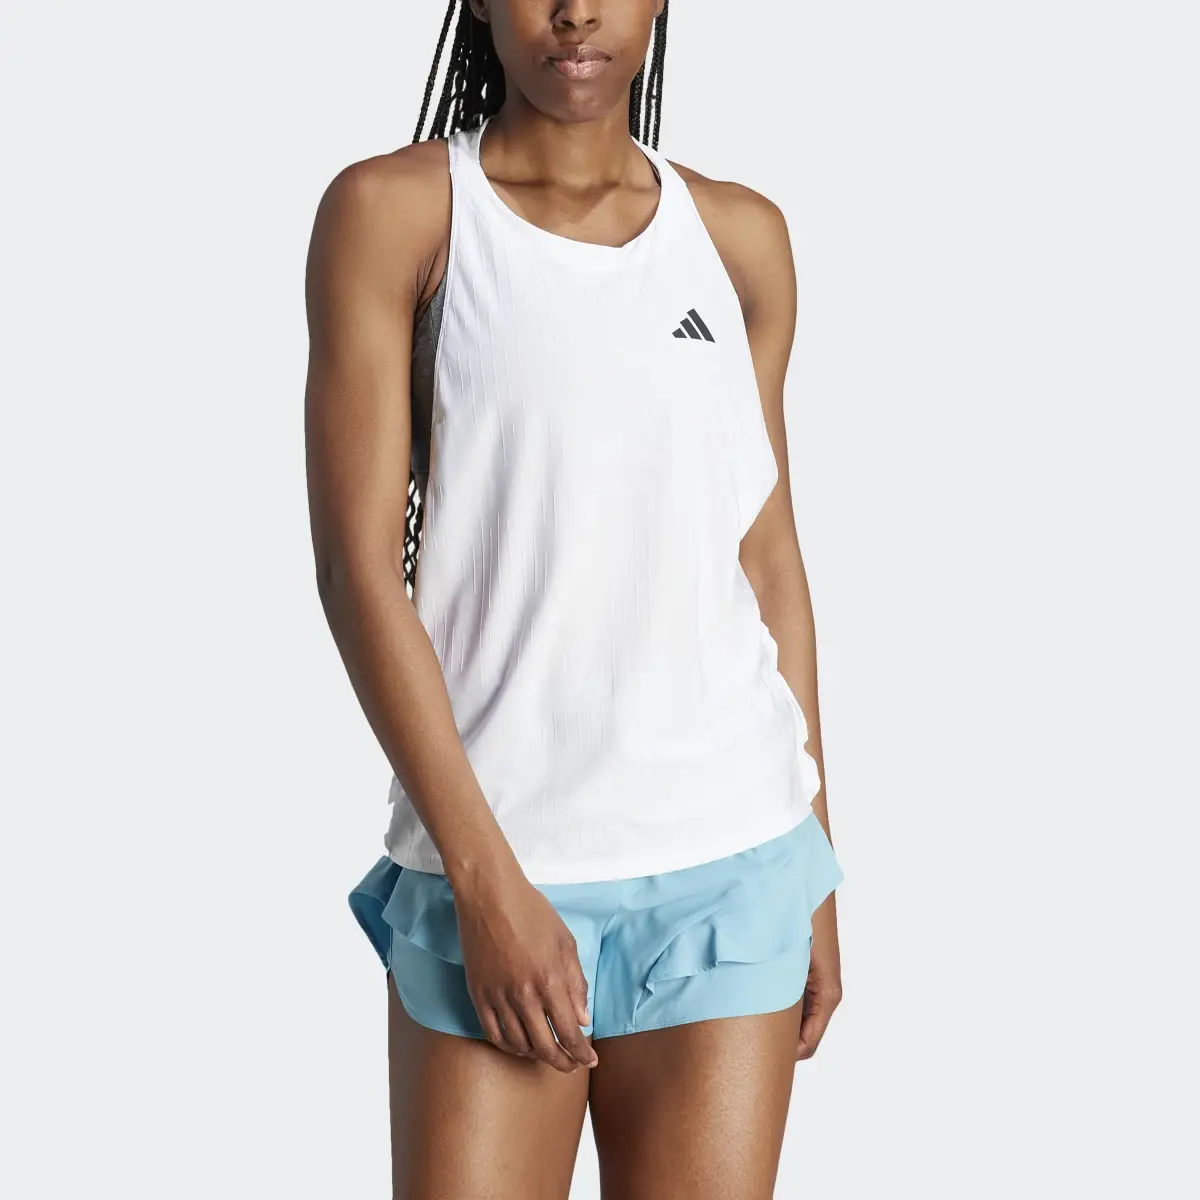 Adidas Made to be Remade Running Tank Top. 1